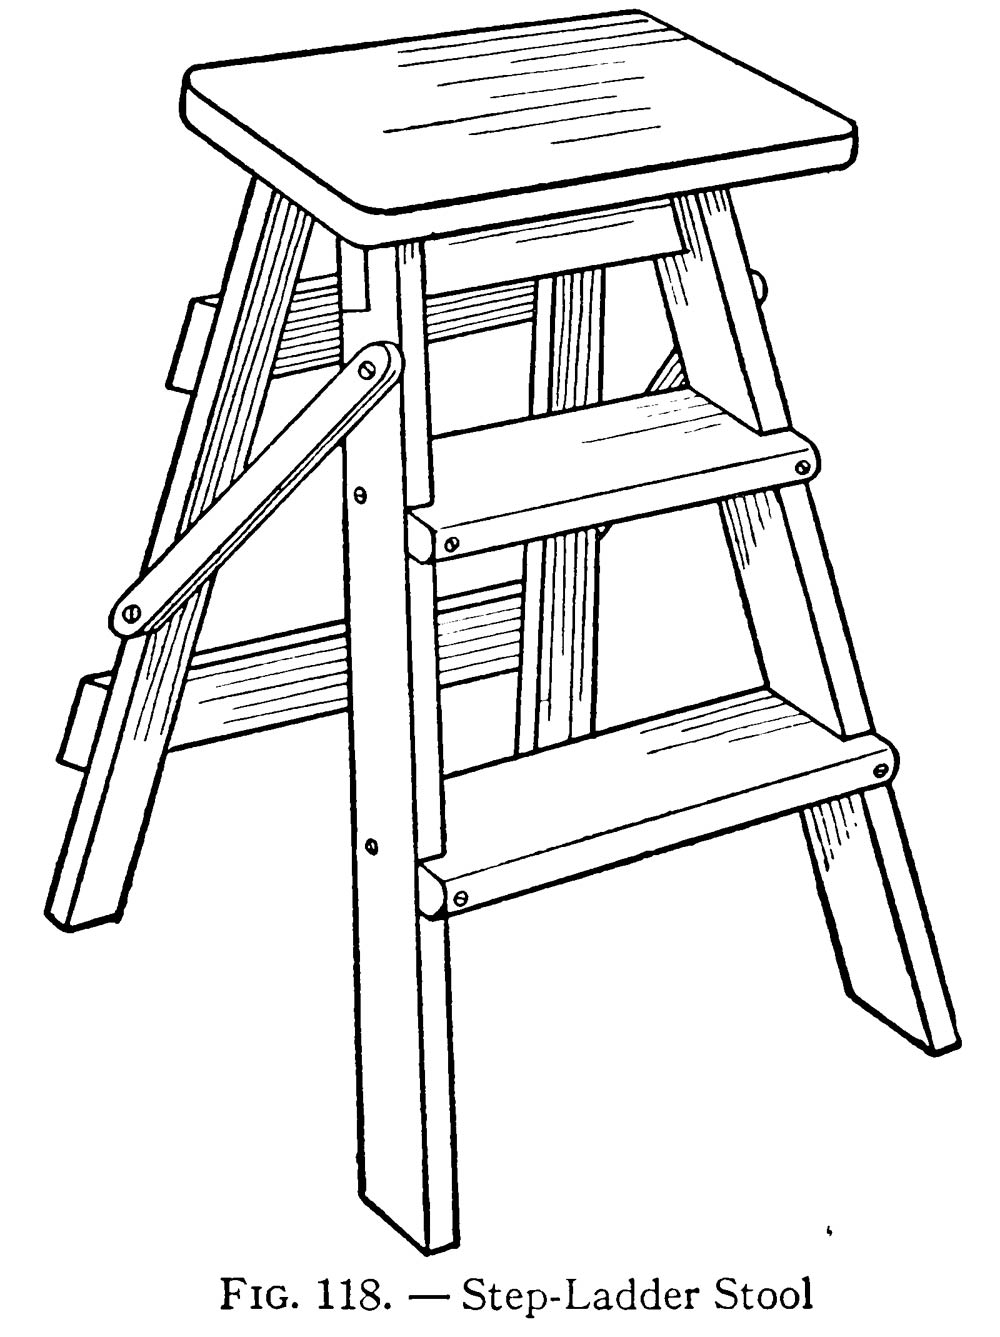 Folding step stool woodworking plan - How to make a step ...